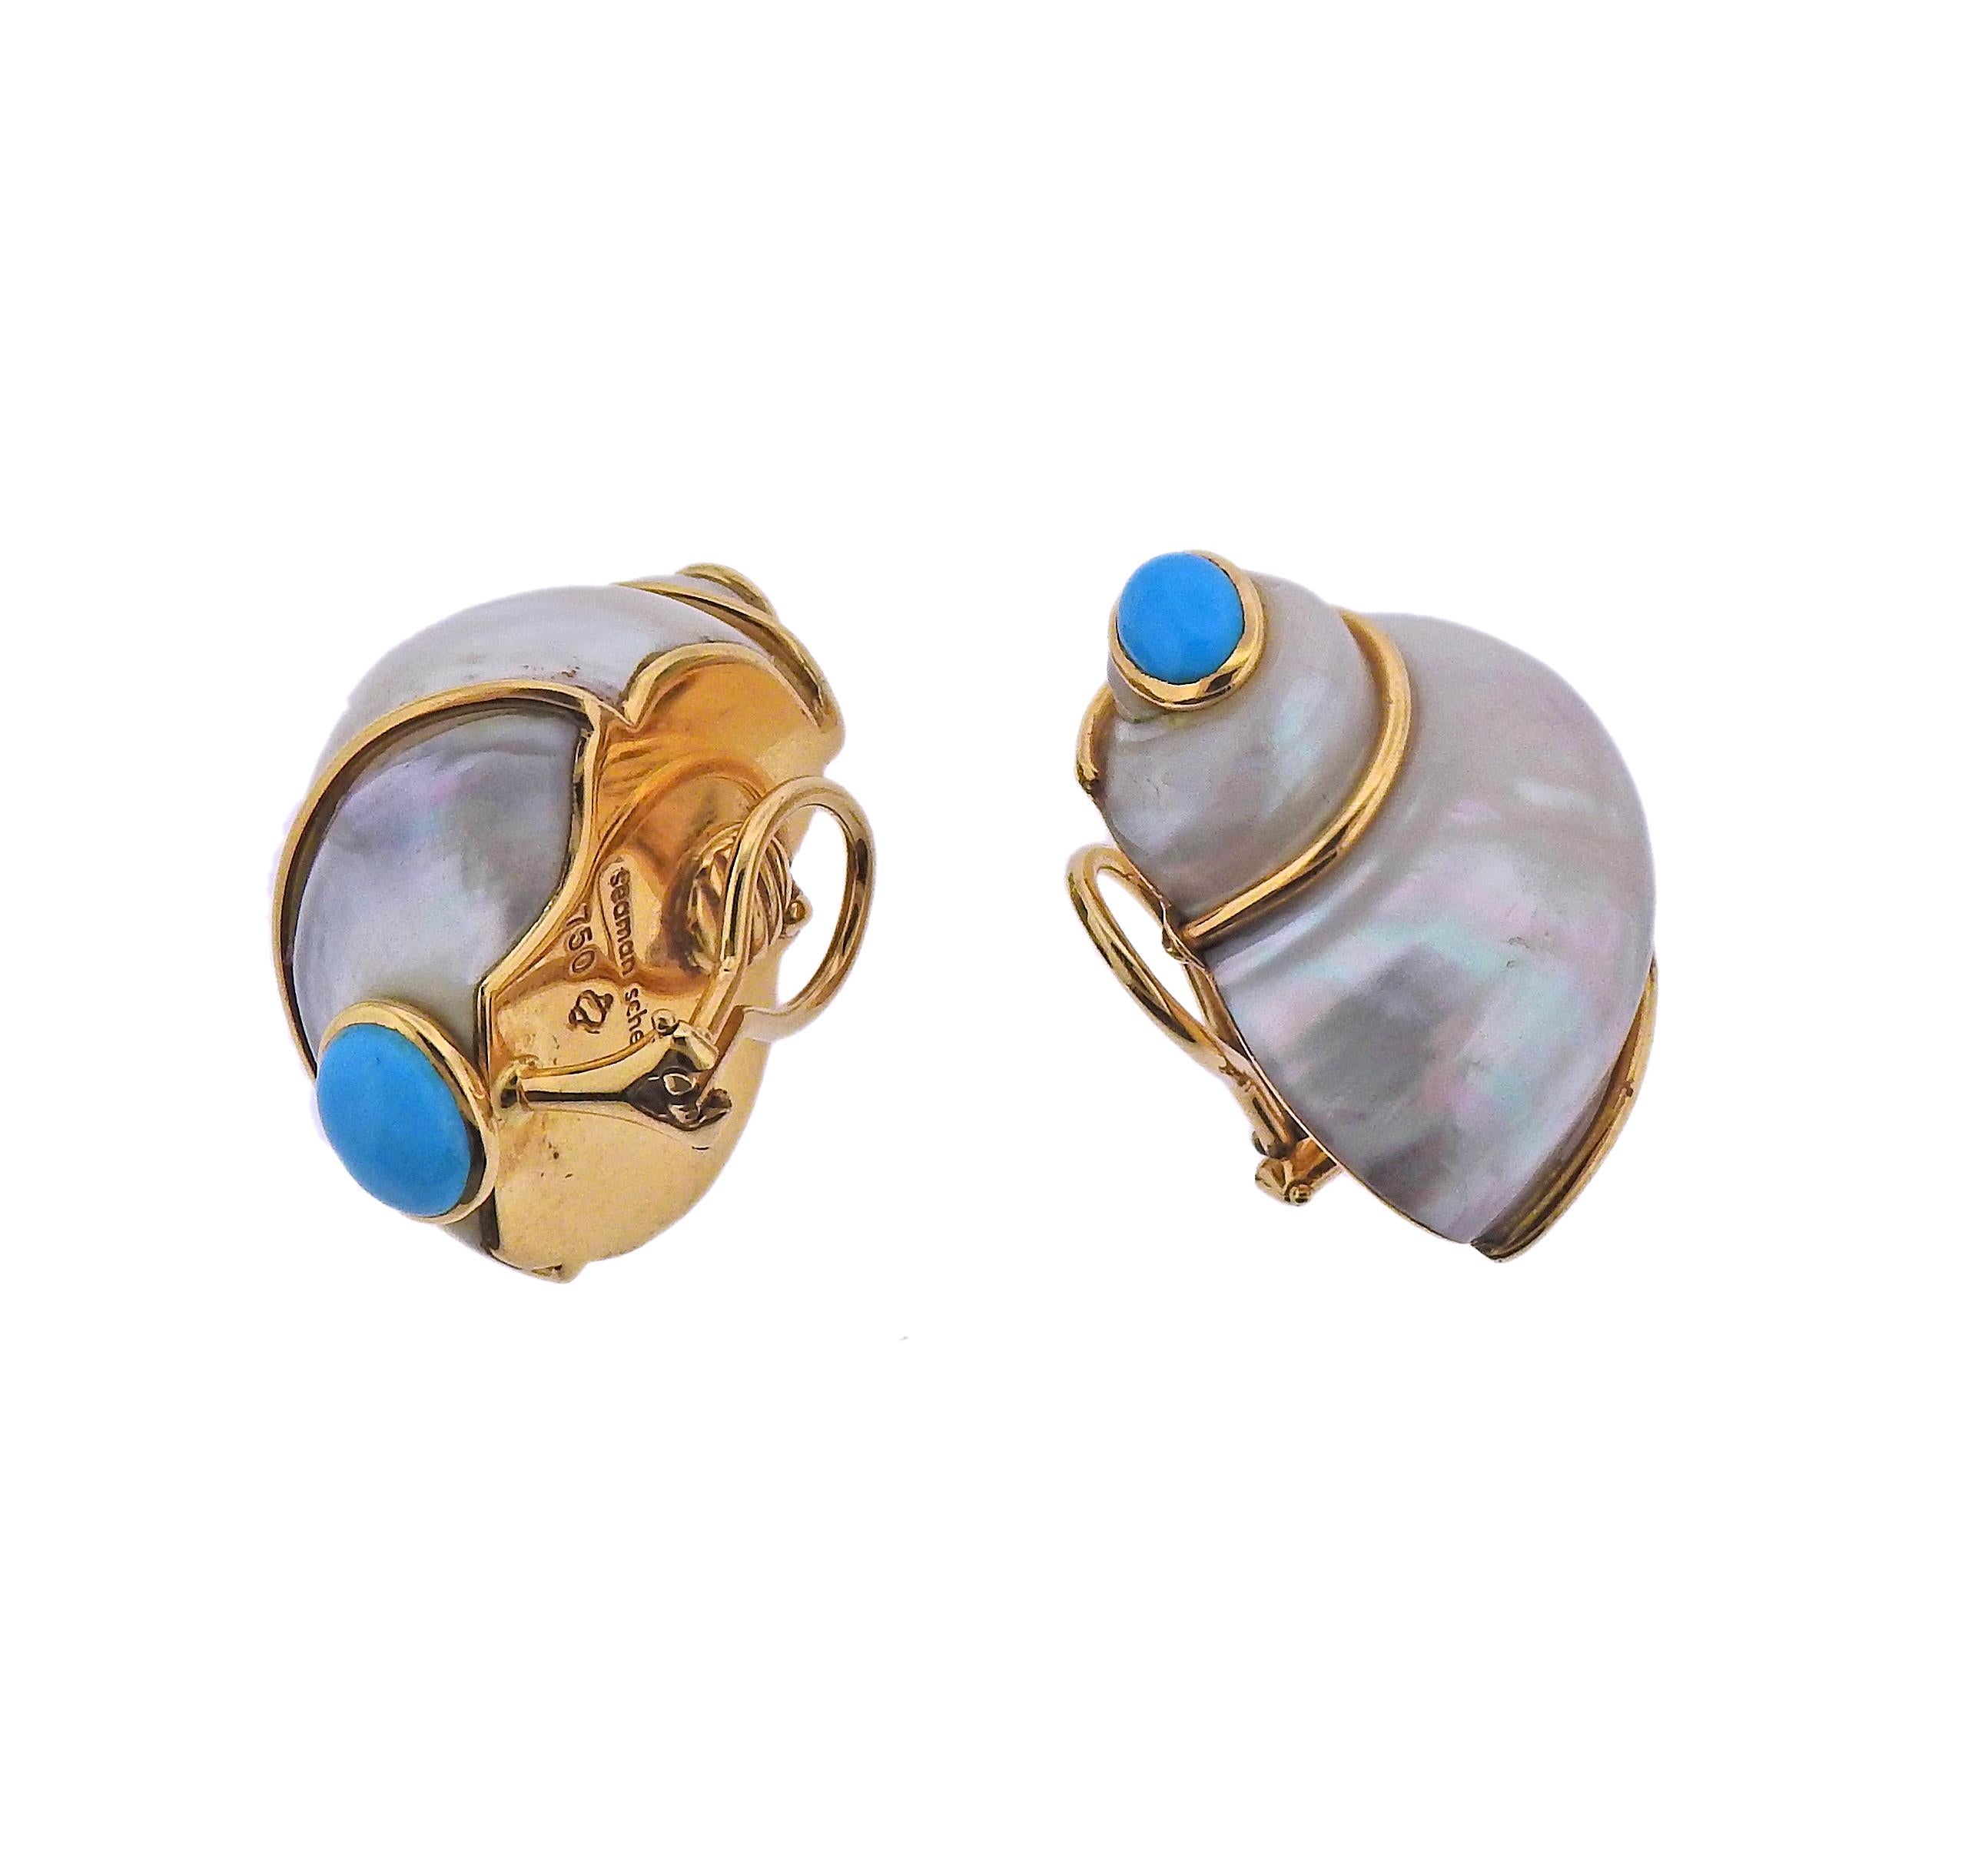 Pair of iconic Turbo Shell earrings by Seaman Schepps, with turquoise. Earrings measure 30mm x 23mm. Marked with Shell signature mark,. 750, Seaman Schepps. Weight - 26.2 grams. 